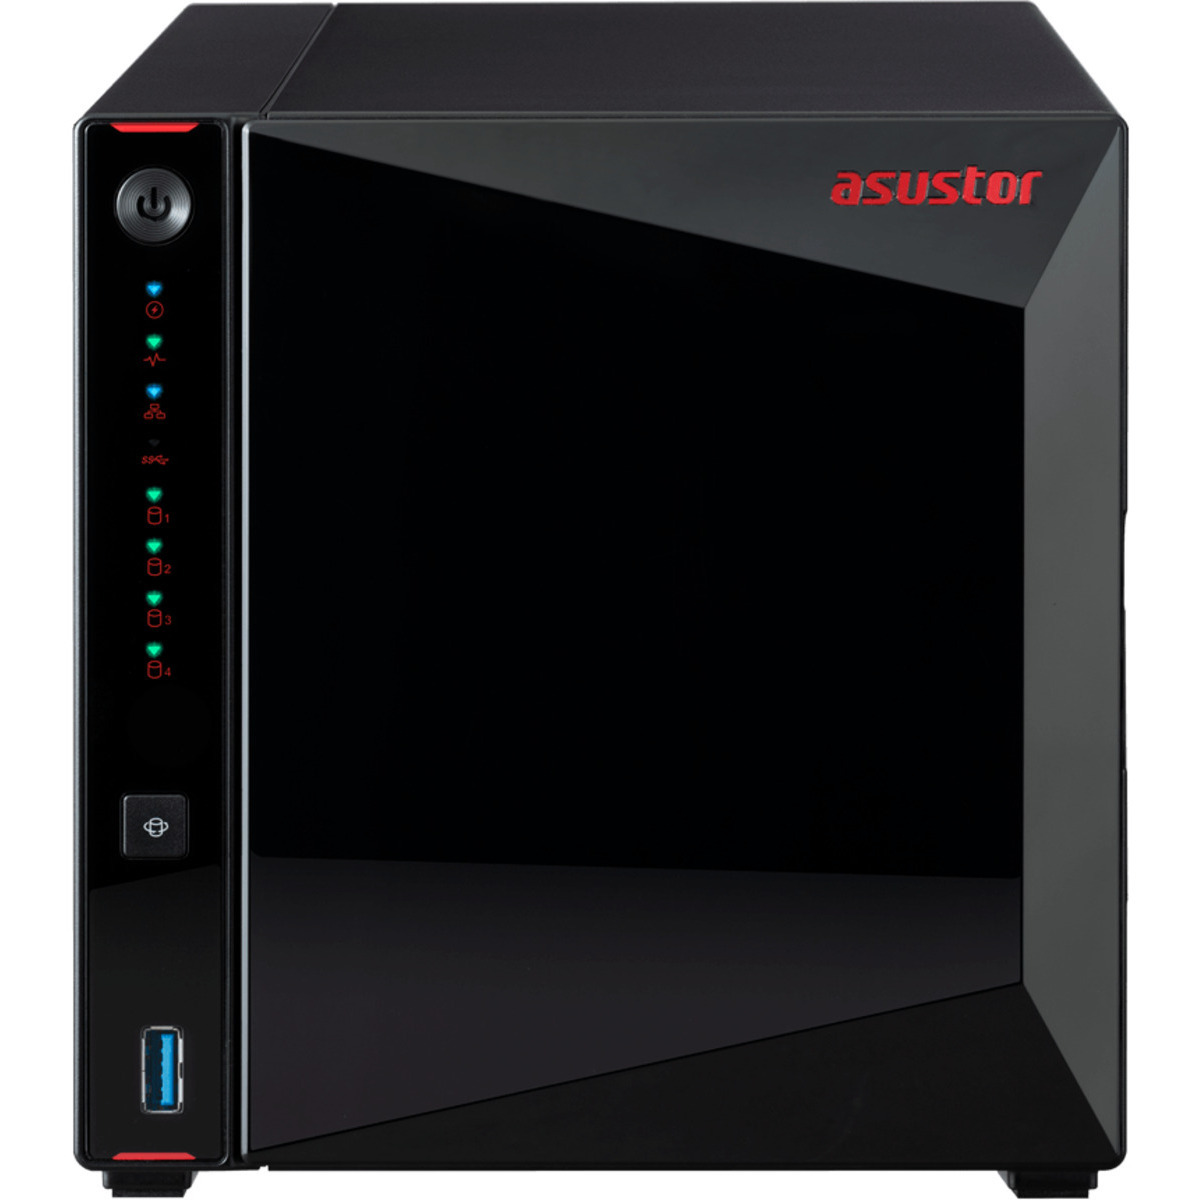 ASUSTOR AS5304T Nimbustor 64tb 4-Bay Desktop Multimedia / Power User / Business NAS - Network Attached Storage Device 4x16tb Seagate EXOS X18 ST16000NM000J 3.5 7200rpm SATA 6Gb/s HDD ENTERPRISE Class Drives Installed - Burn-In Tested - FREE RAM UPGRADE AS5304T Nimbustor